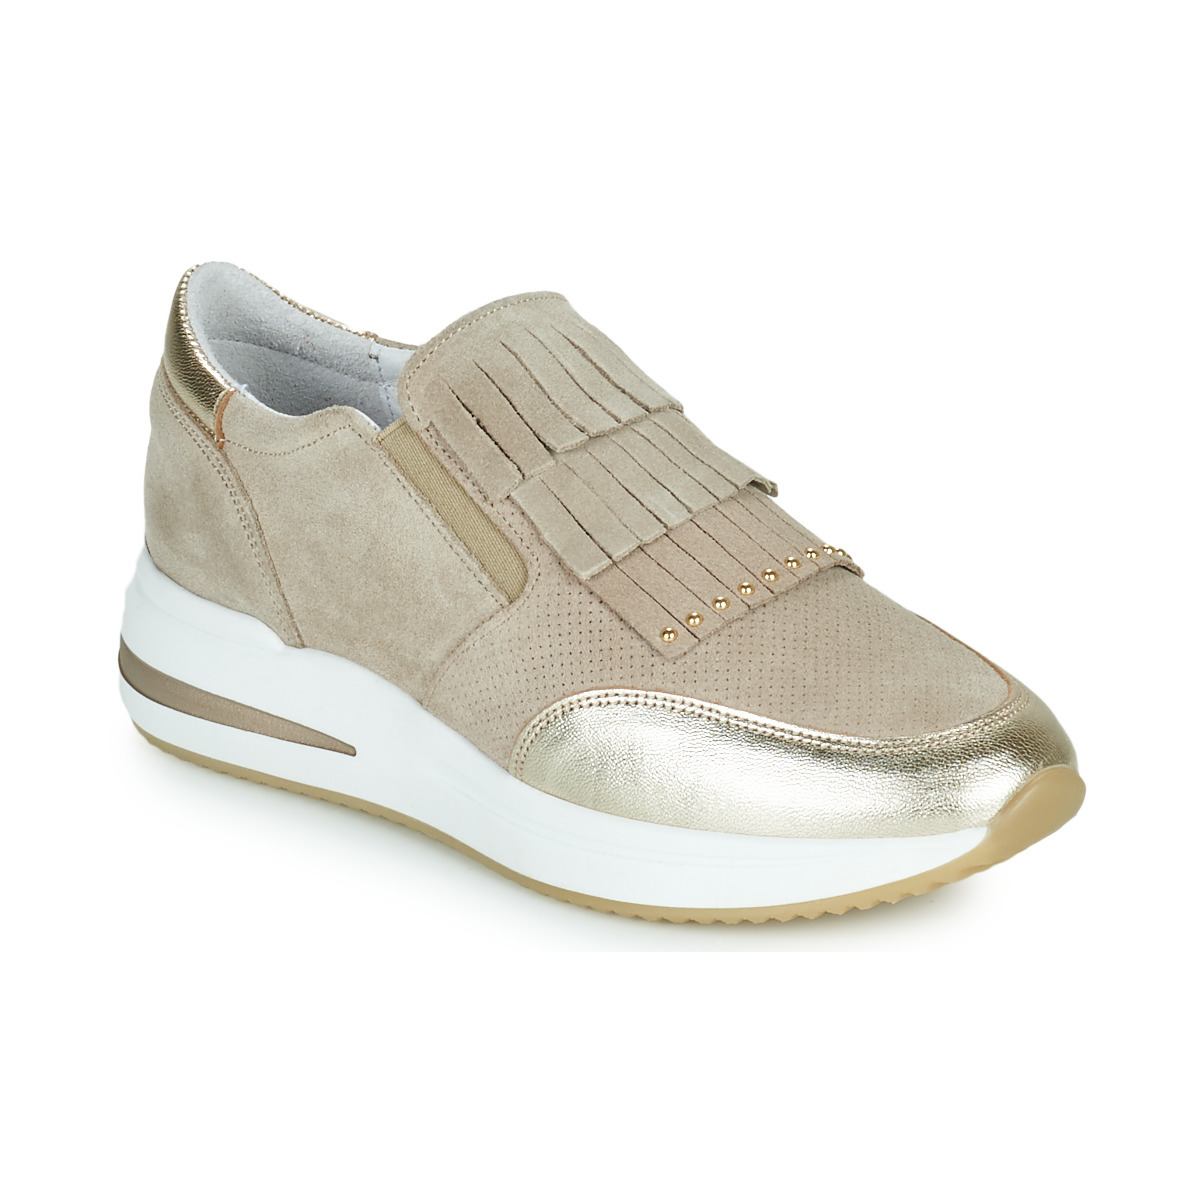 Myma Sneakers in Beige for Women from Spartoo GOOFASH